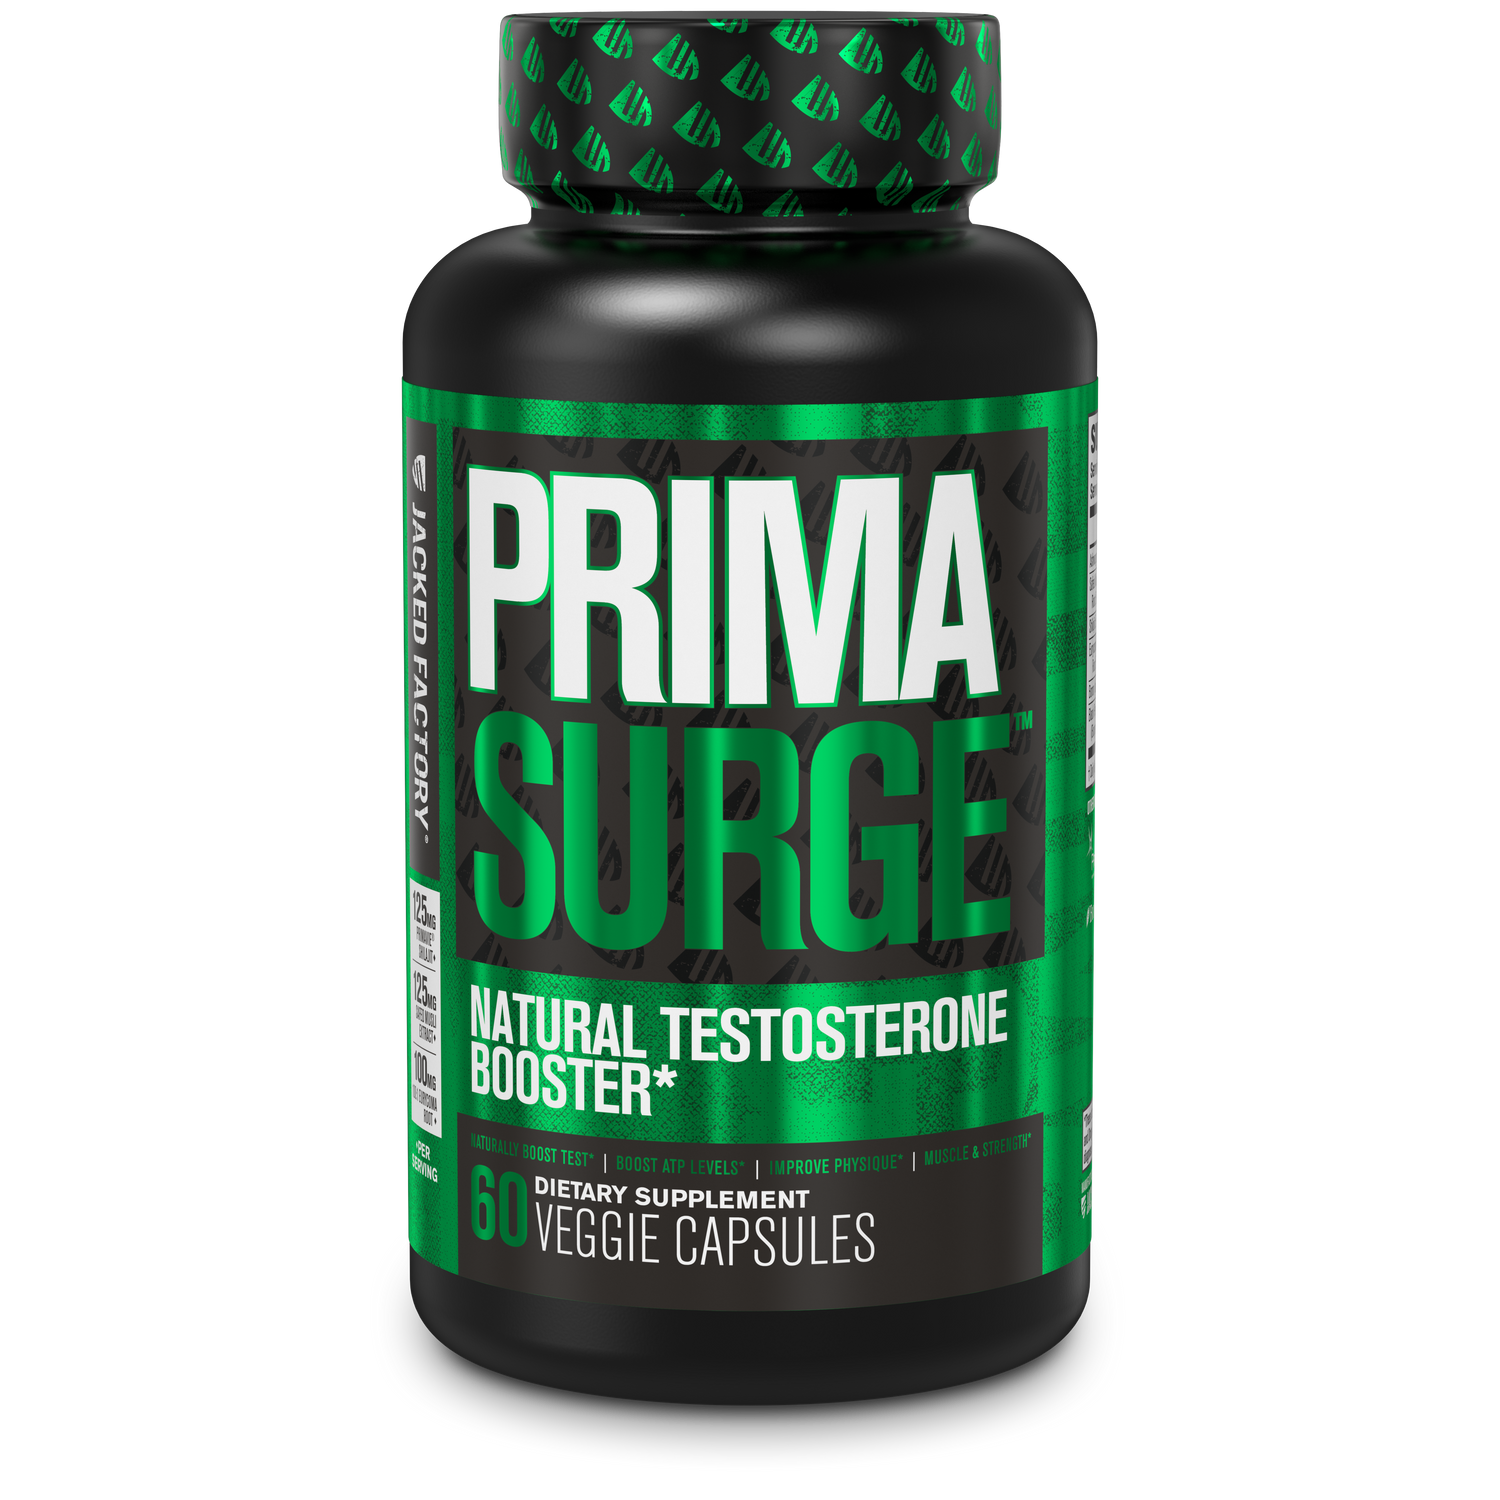 Jacked Factory's Primasurge (60 veggie capsules) in a black bottle with green label